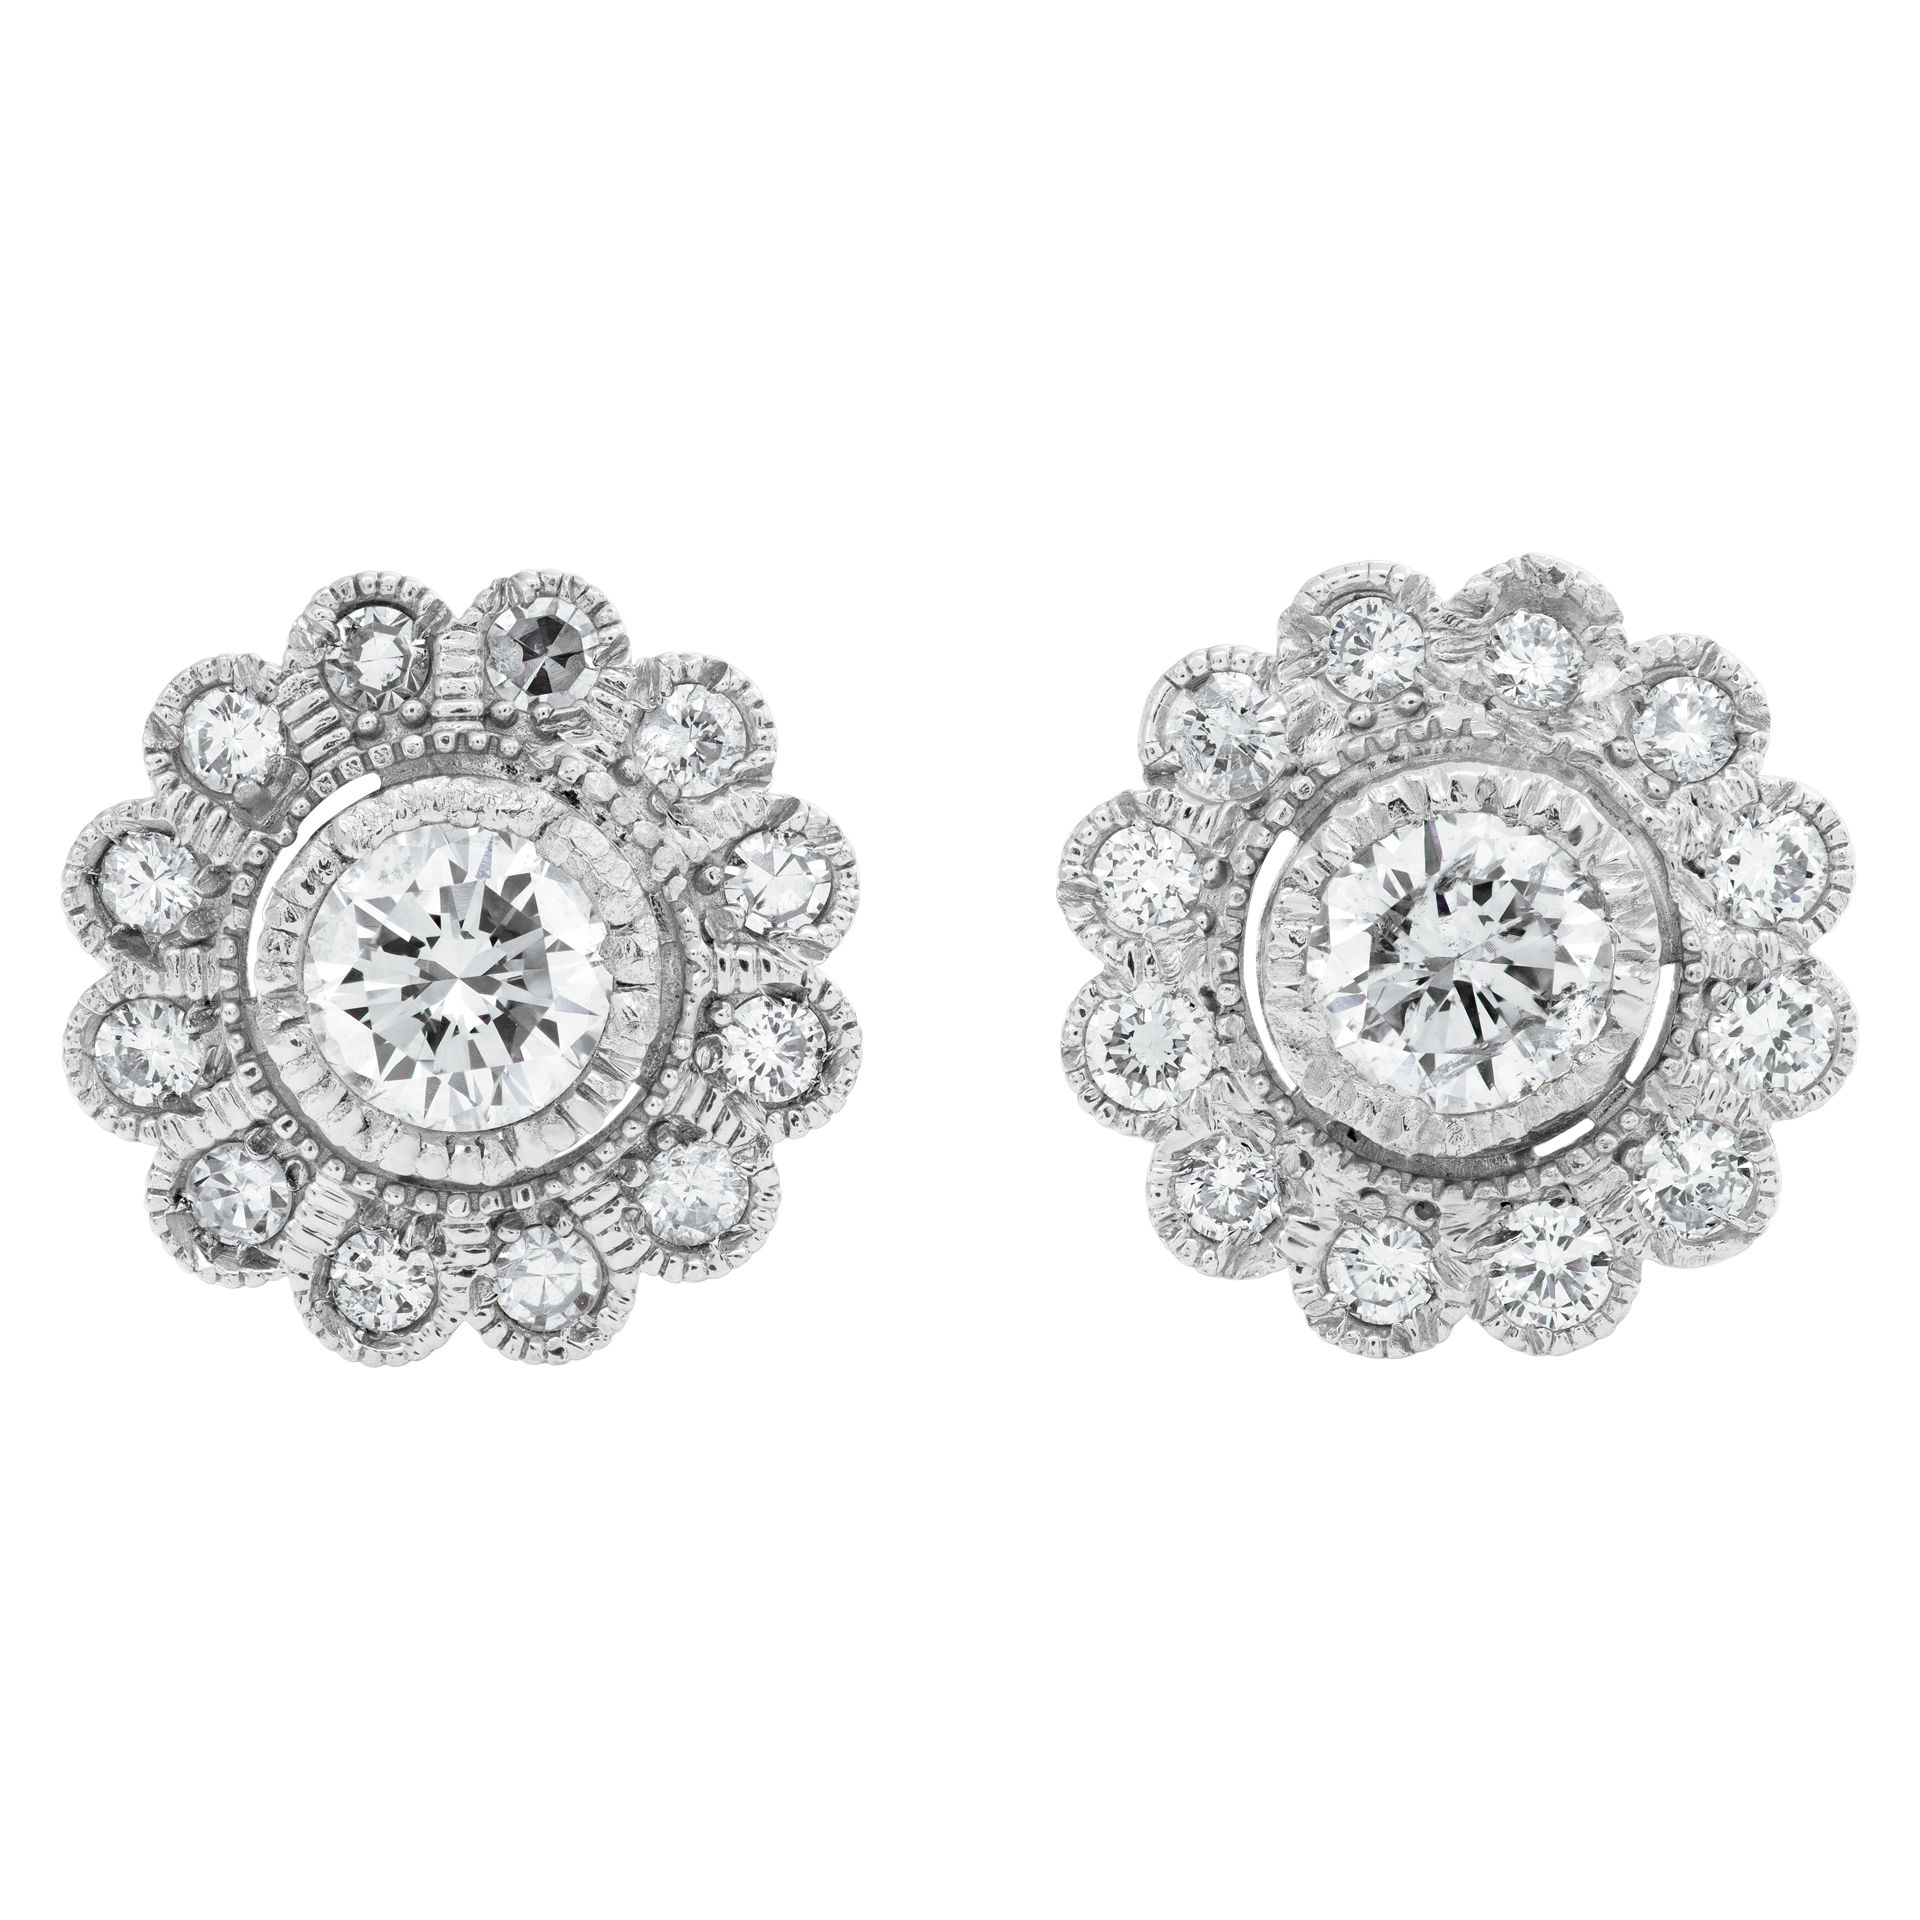 Diamond studs earring set in 18K white gold. Brilliant cut diamonds total approx. weight: 0.90 carats image 1